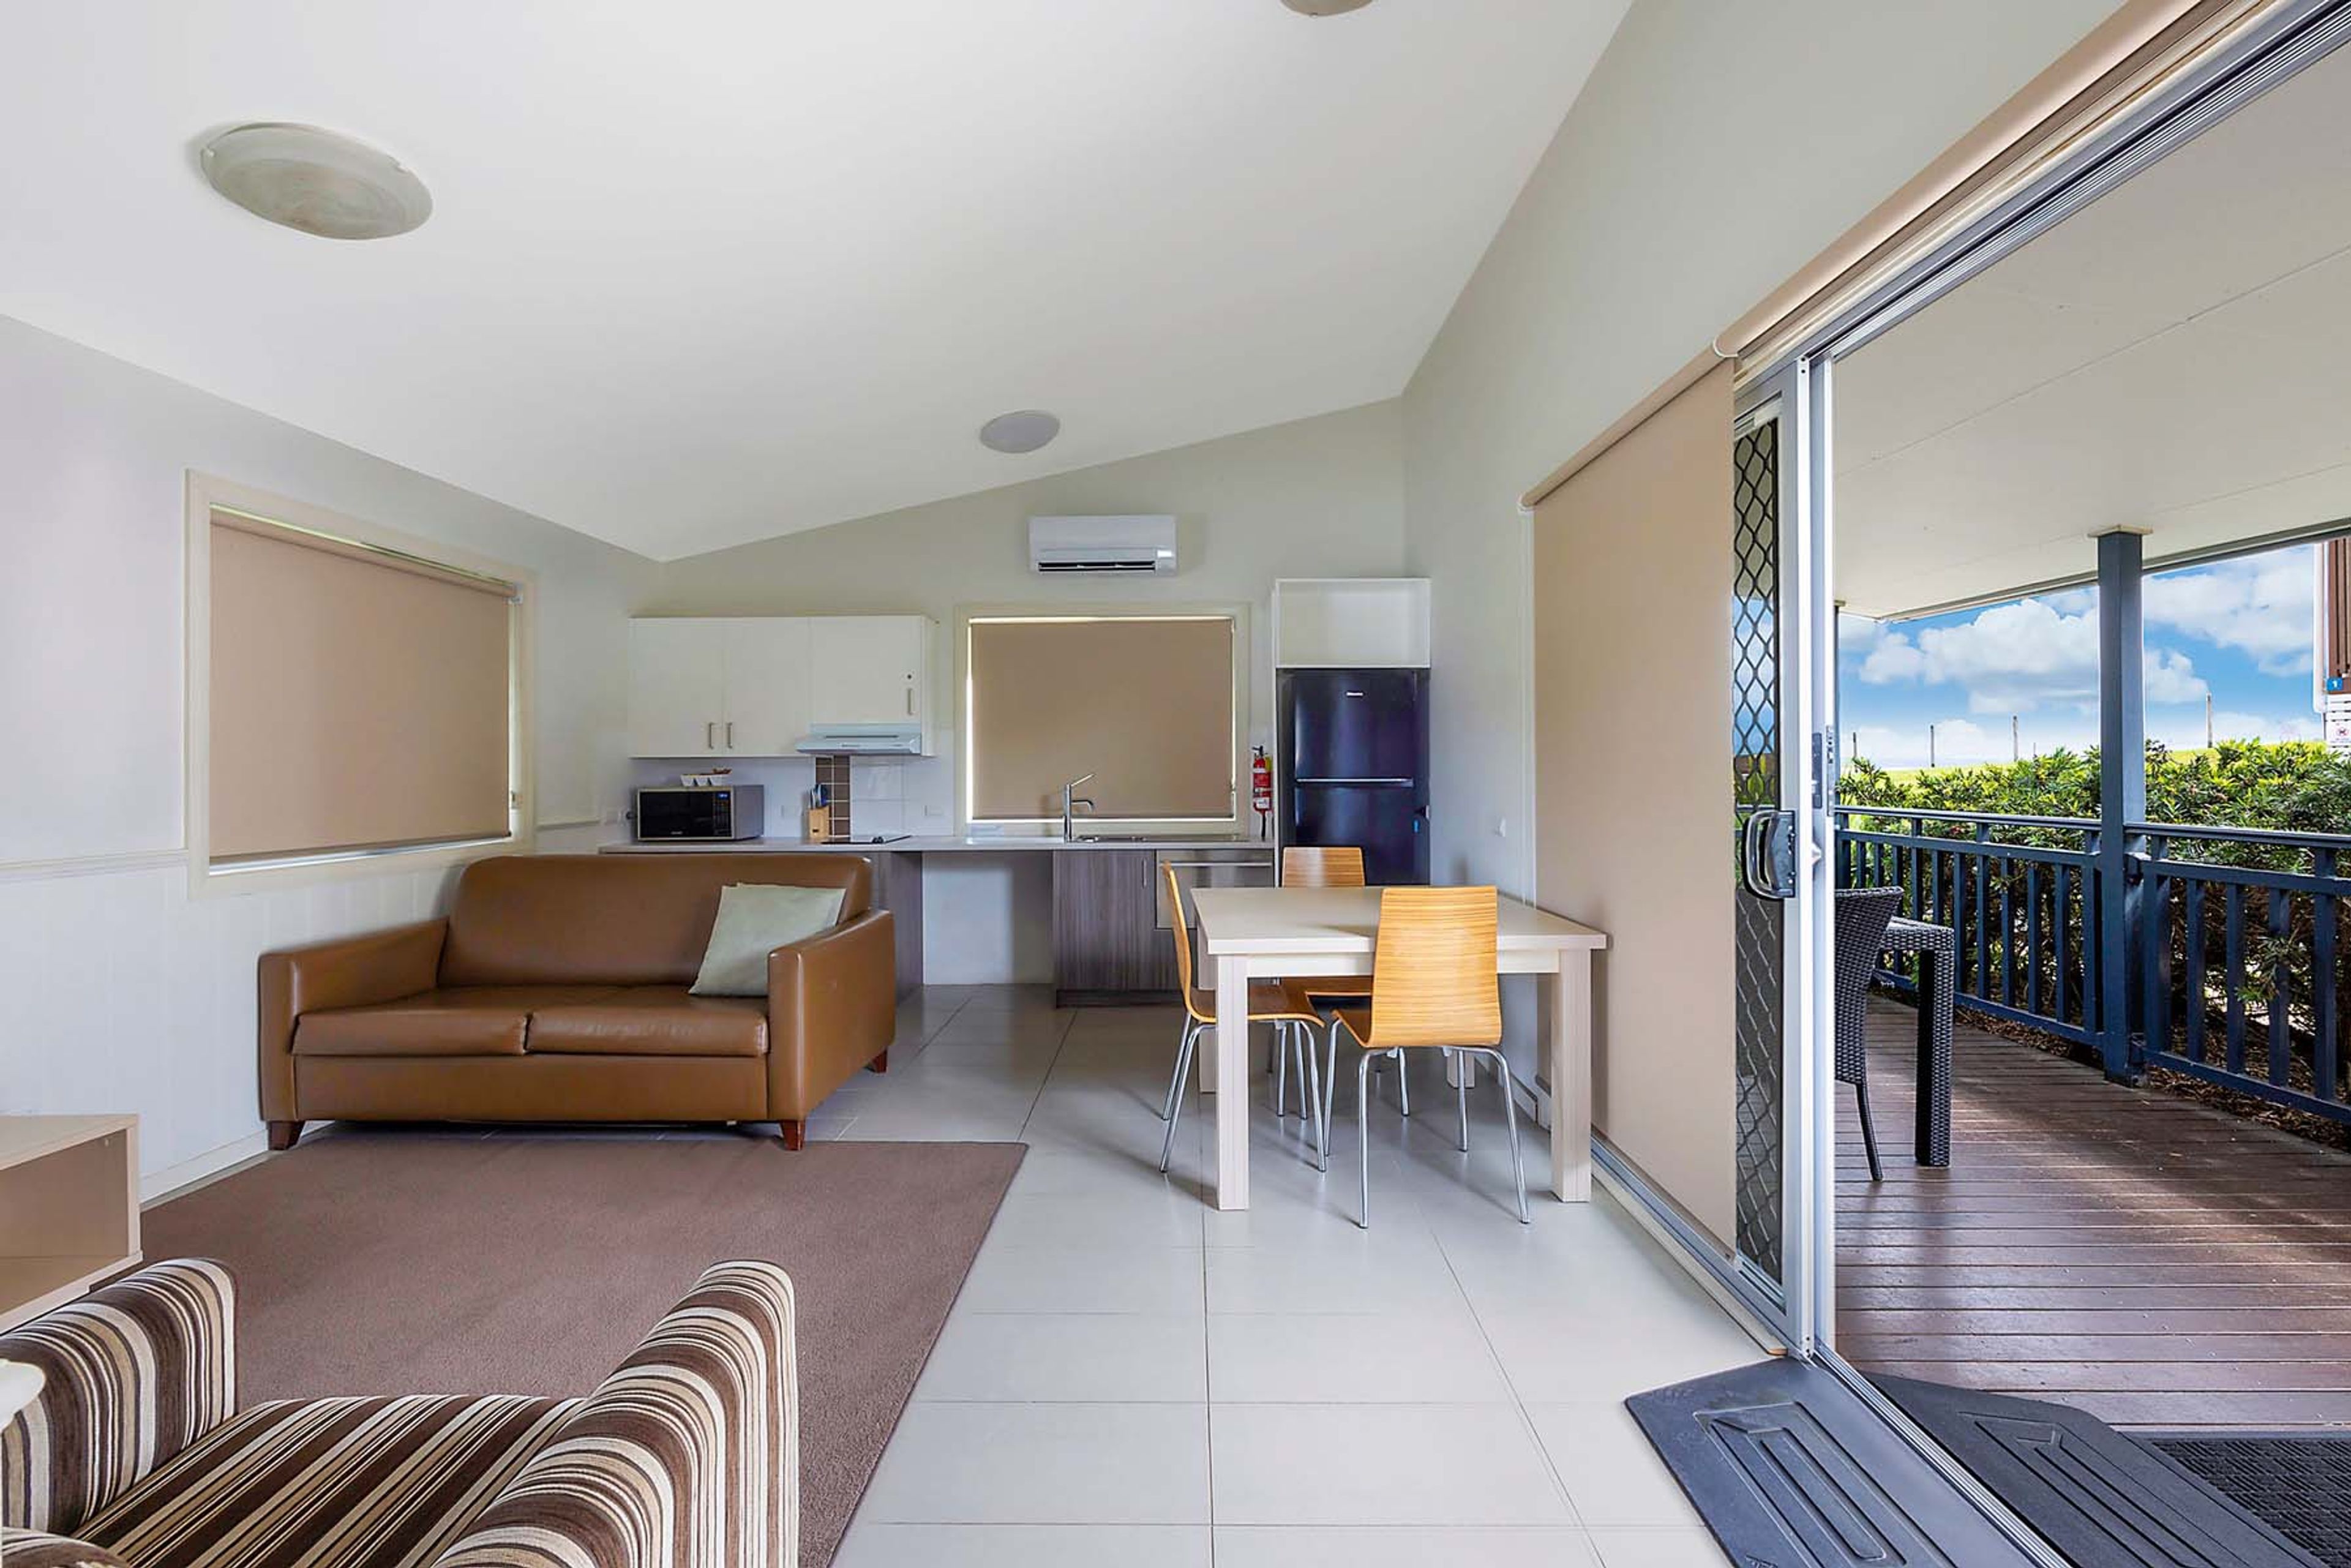 Bermagui Superior Cabin - Sleeps 2 - Dining-Kitche